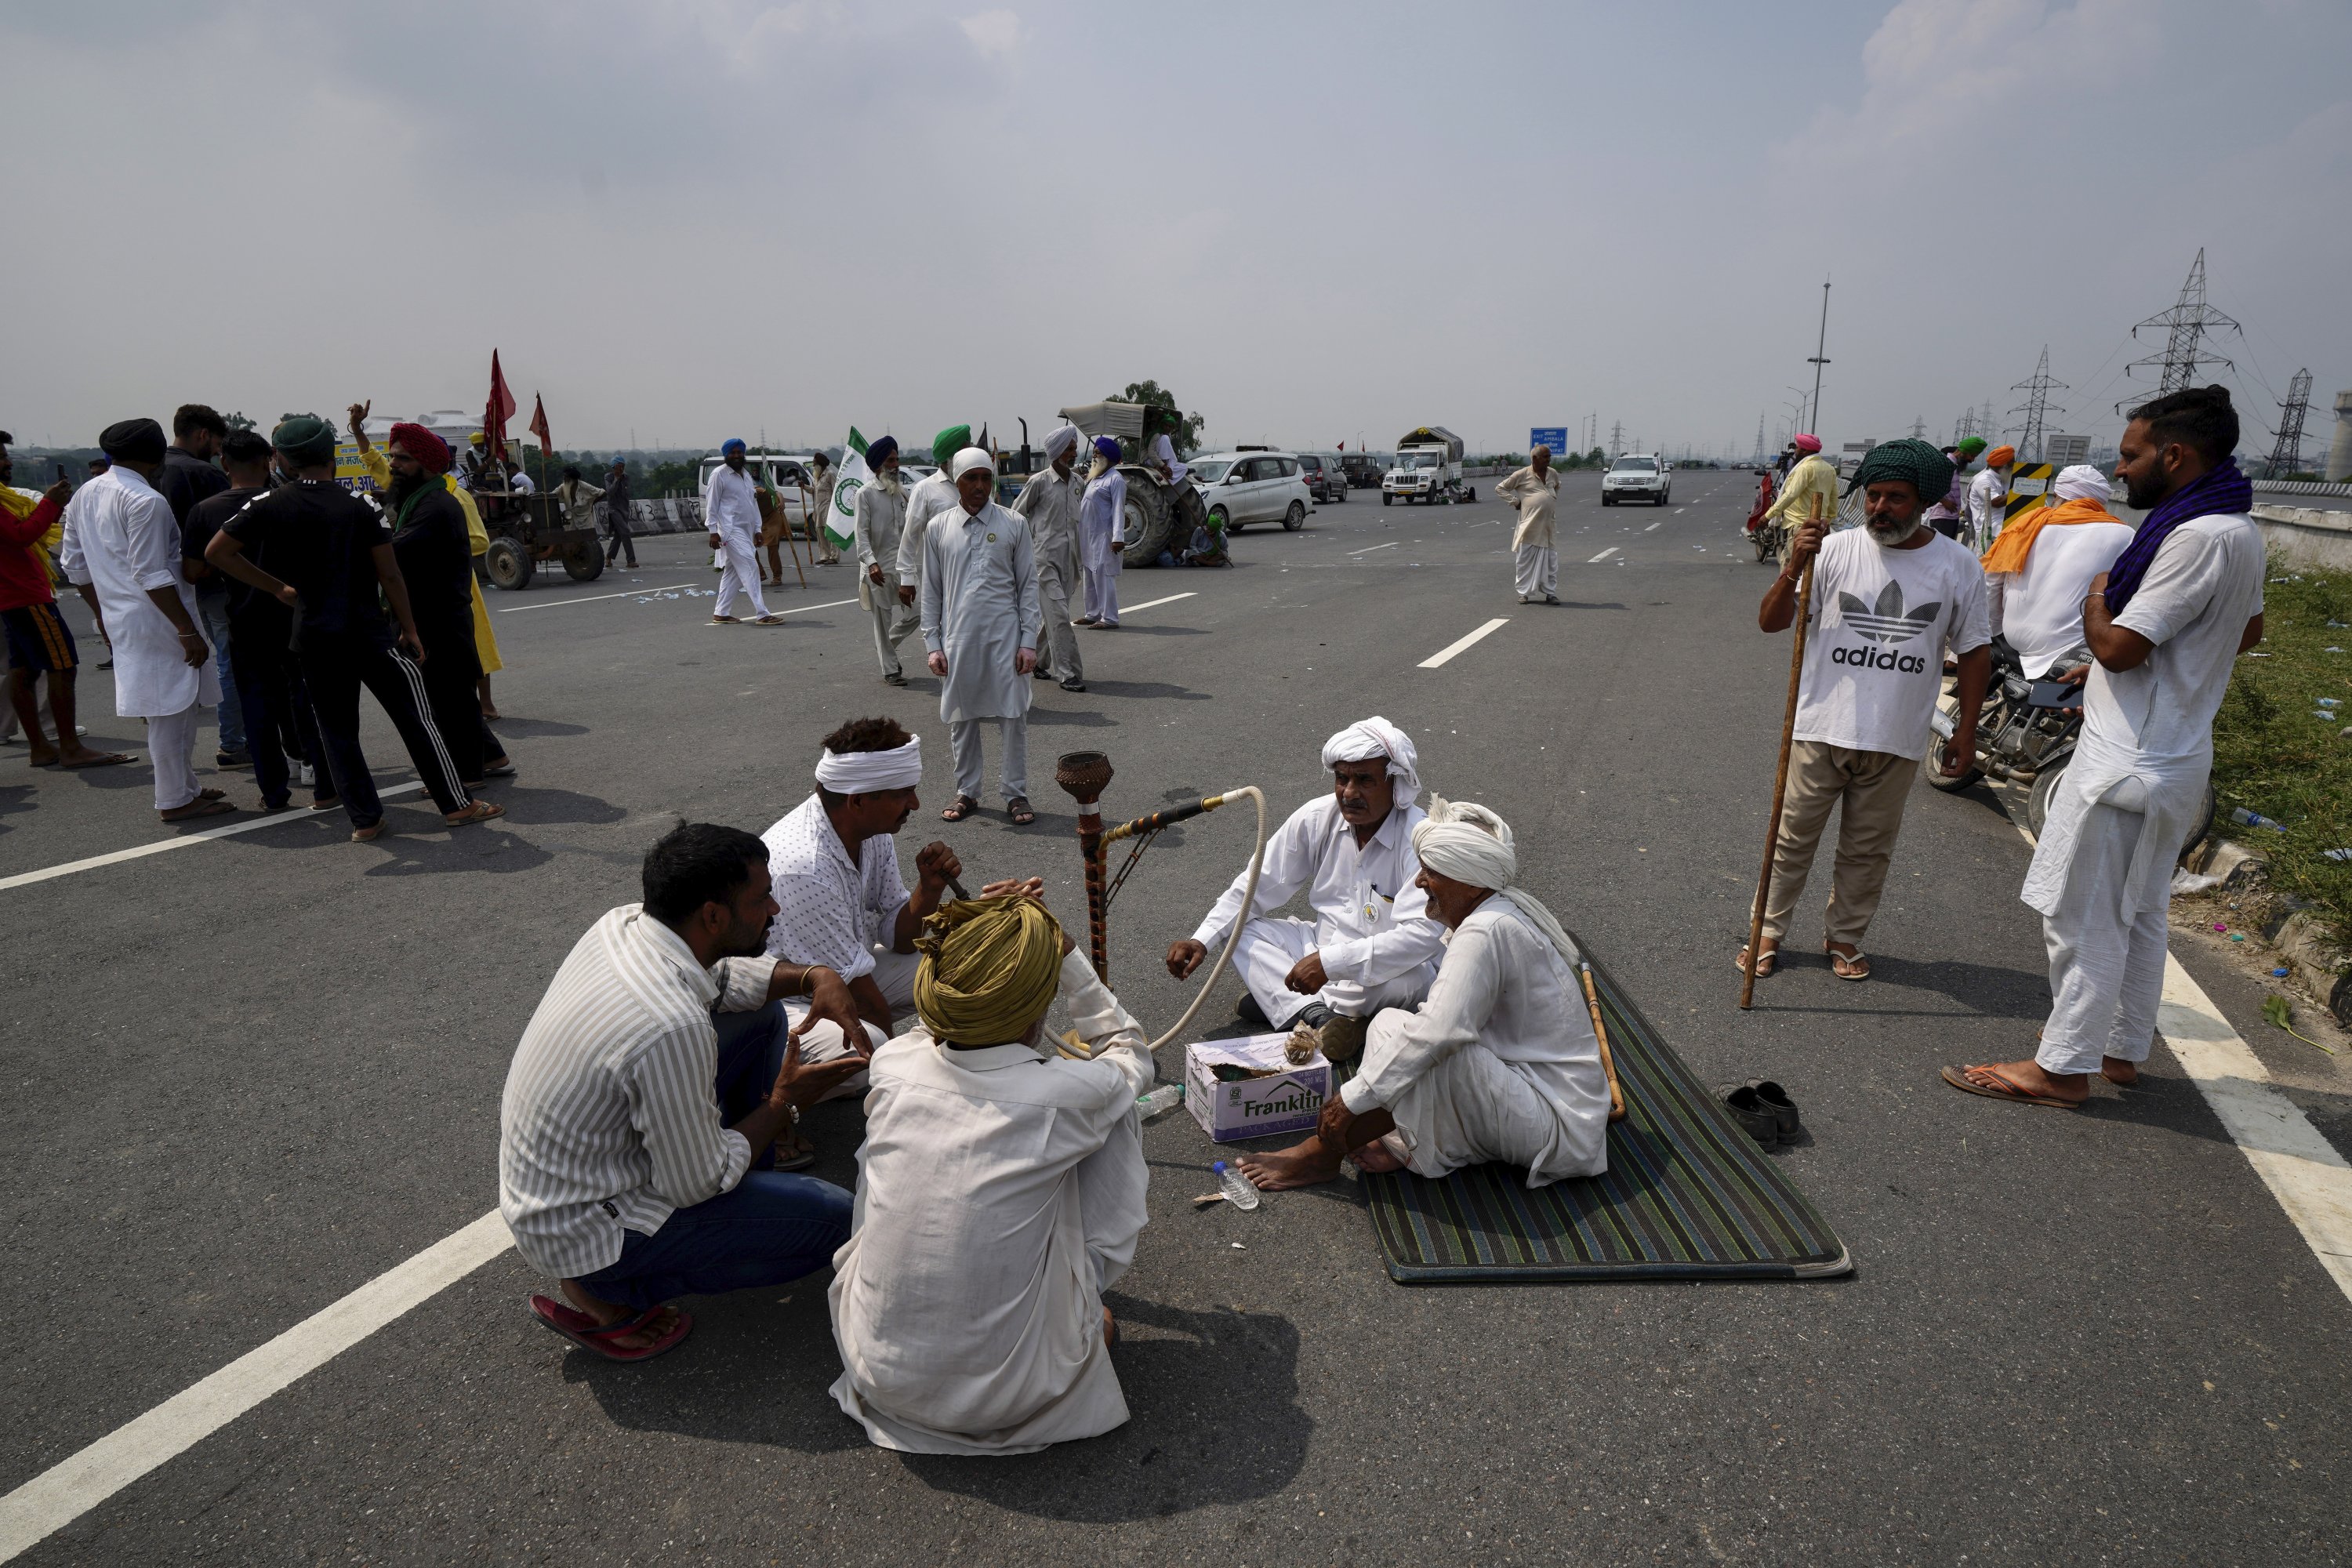 Protesting farmers gather at Singhu on the outskirts of New Delhi, India, Monday, Sept. 27, 2021. (AP Photo)